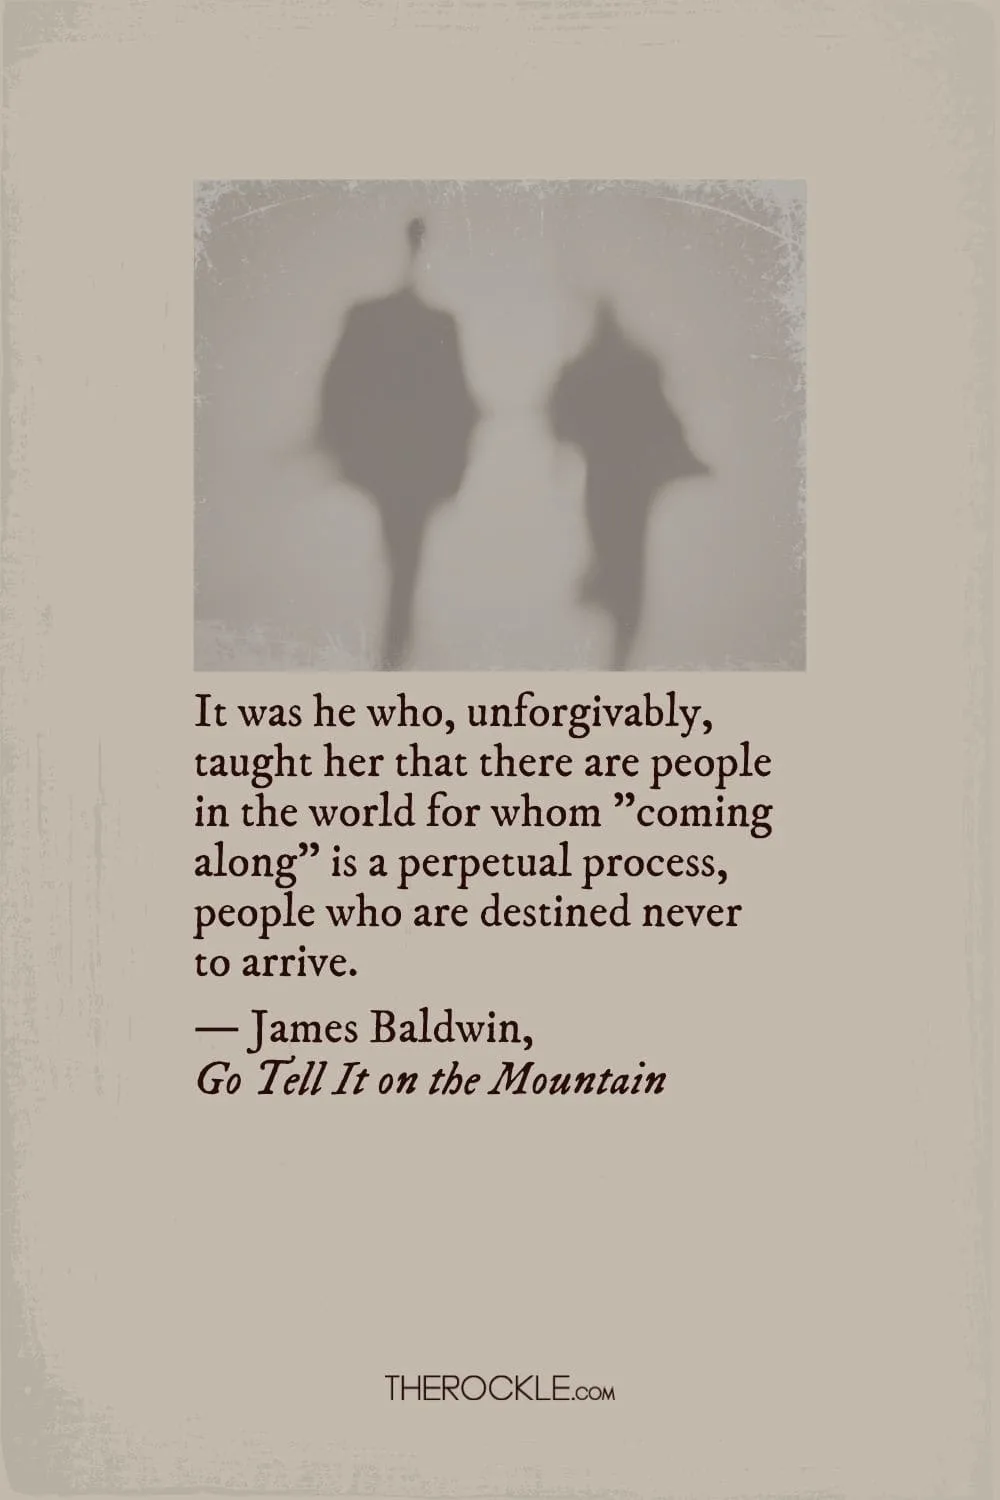 James Baldwin on the lack of personal growth